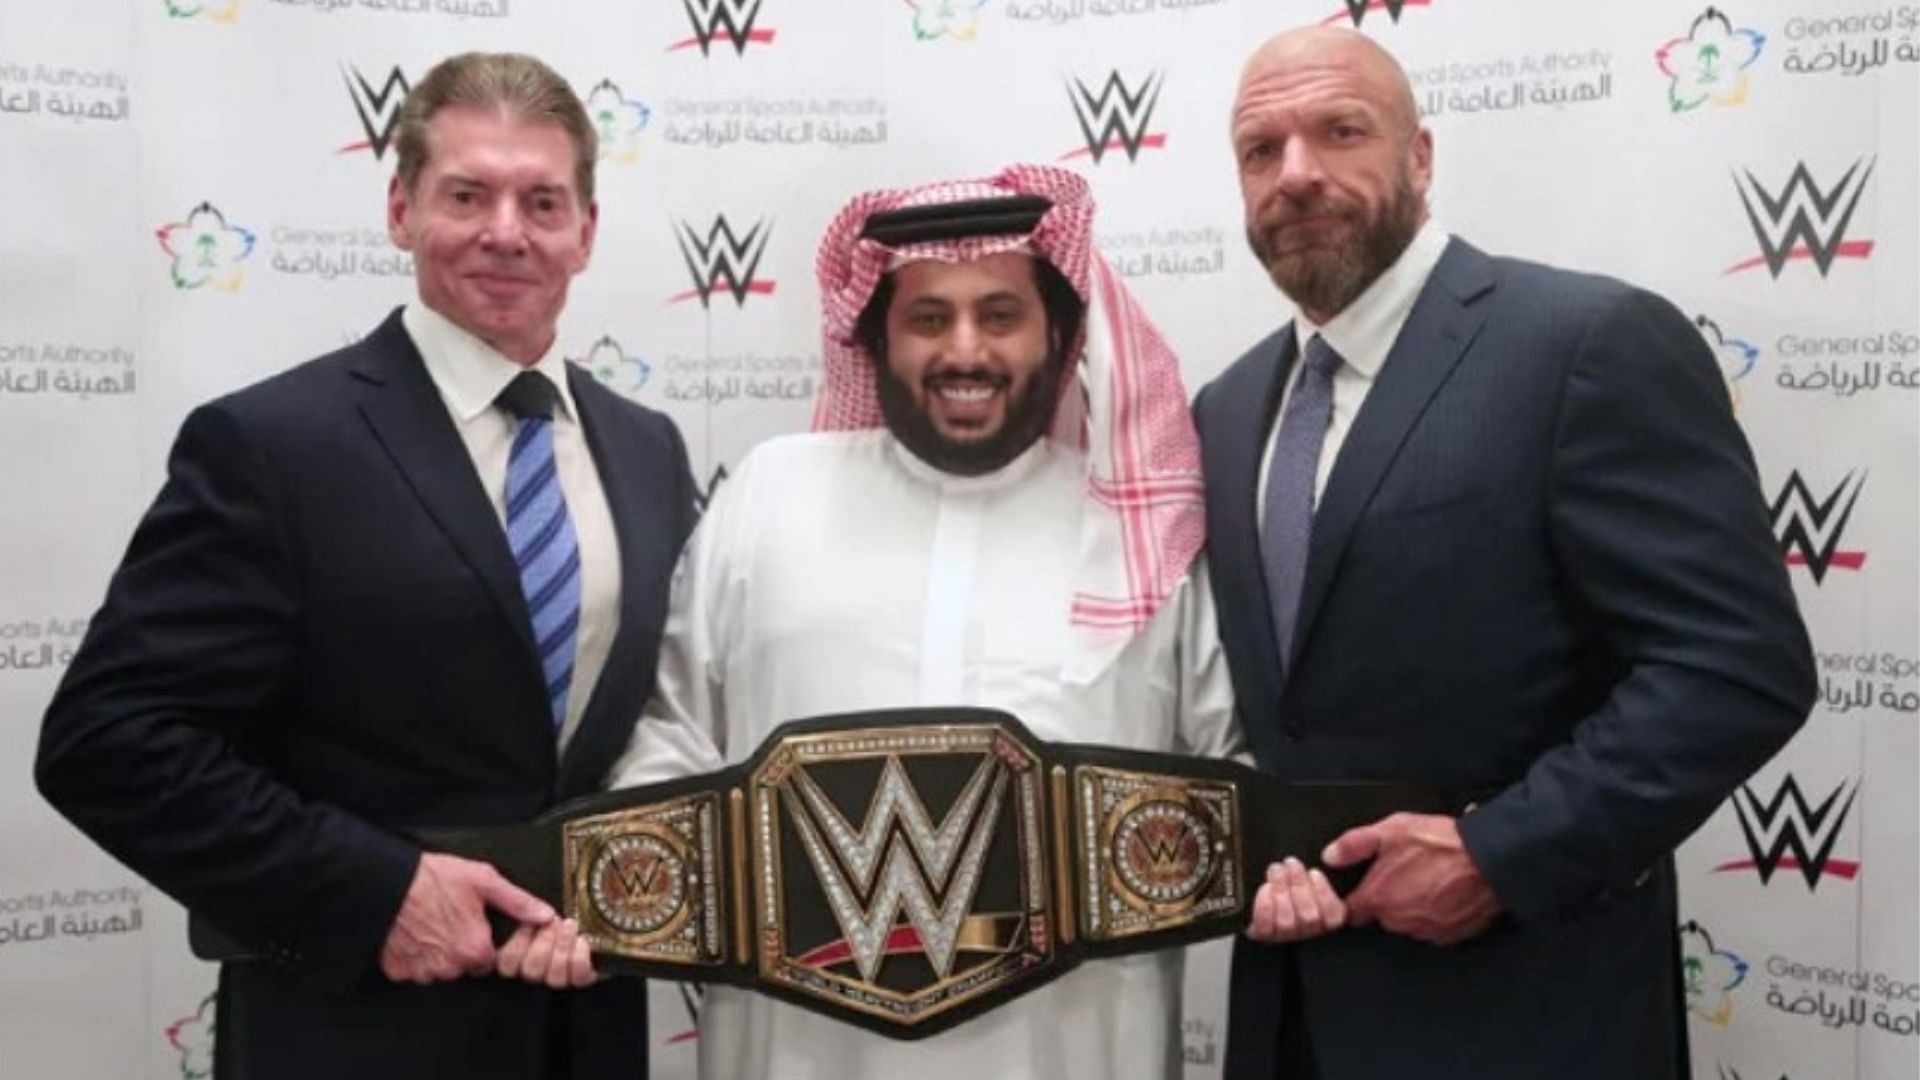 Everything to know about WWE's Saudi Arabia deal